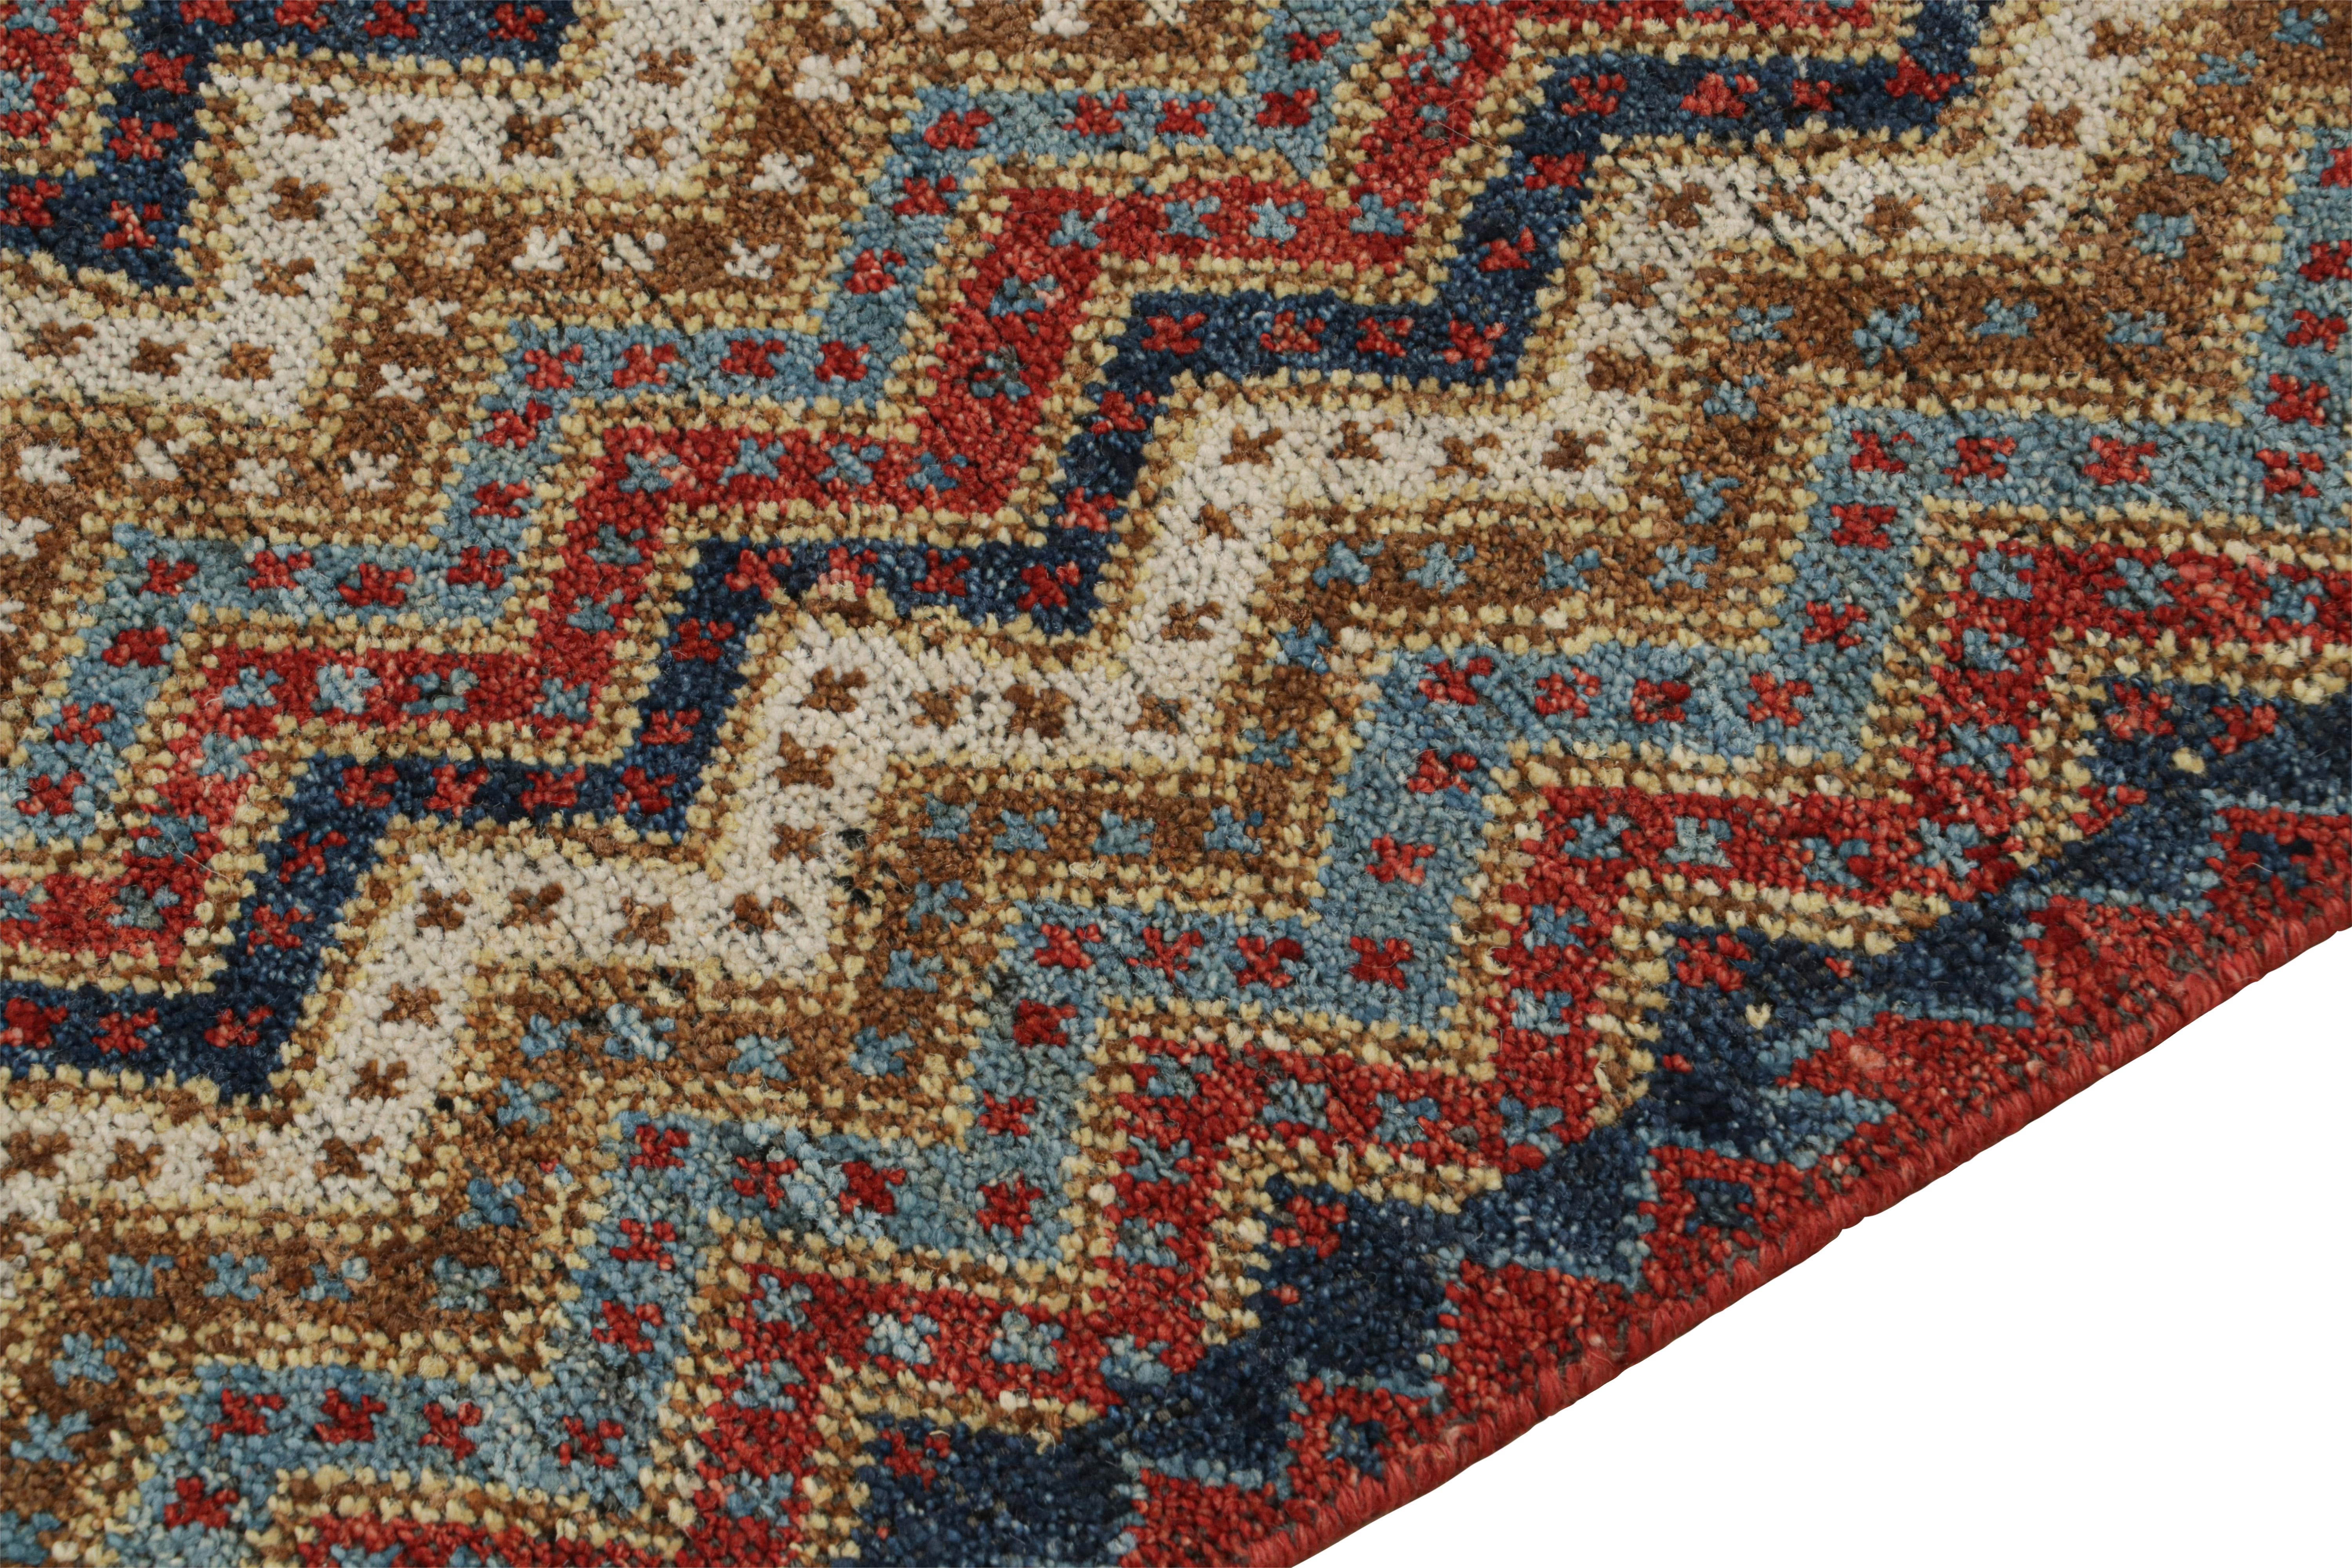 Hand-Knotted Rug & Kilim’s Antique Tribal Style Rug in Red, Blue and Beige-Brown Chevrons For Sale